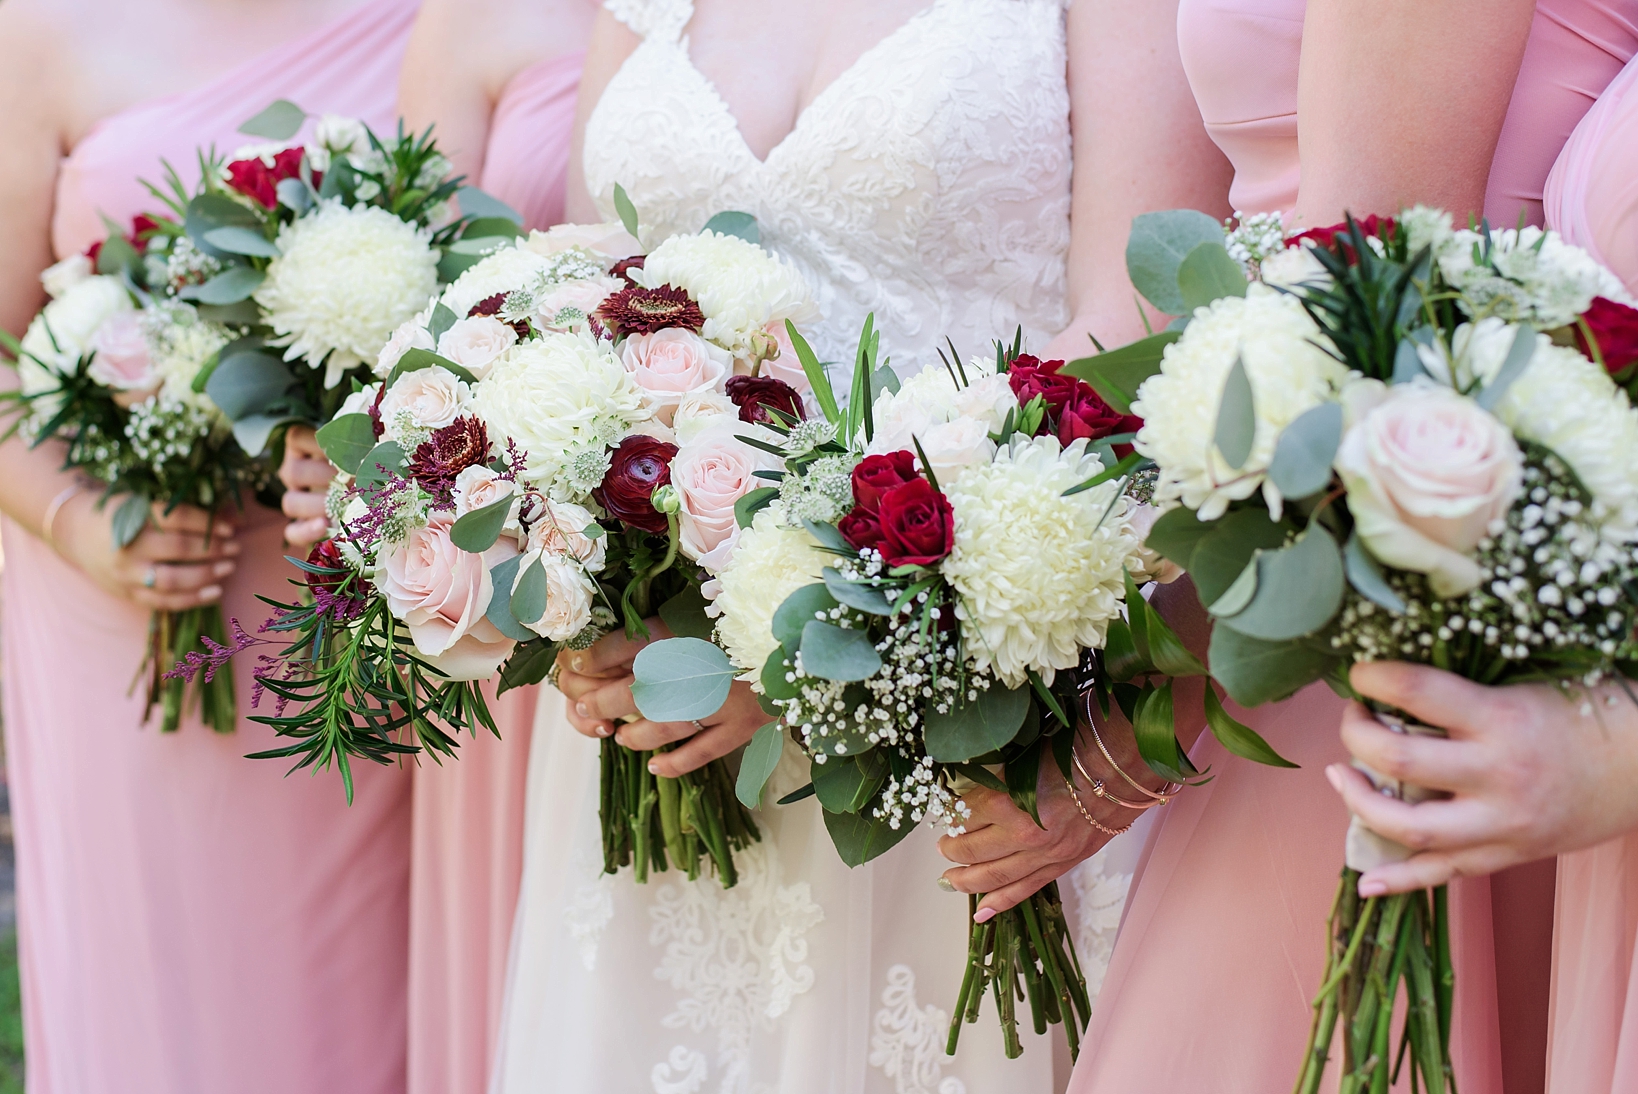 The wedding bouquets with blush and white dresses